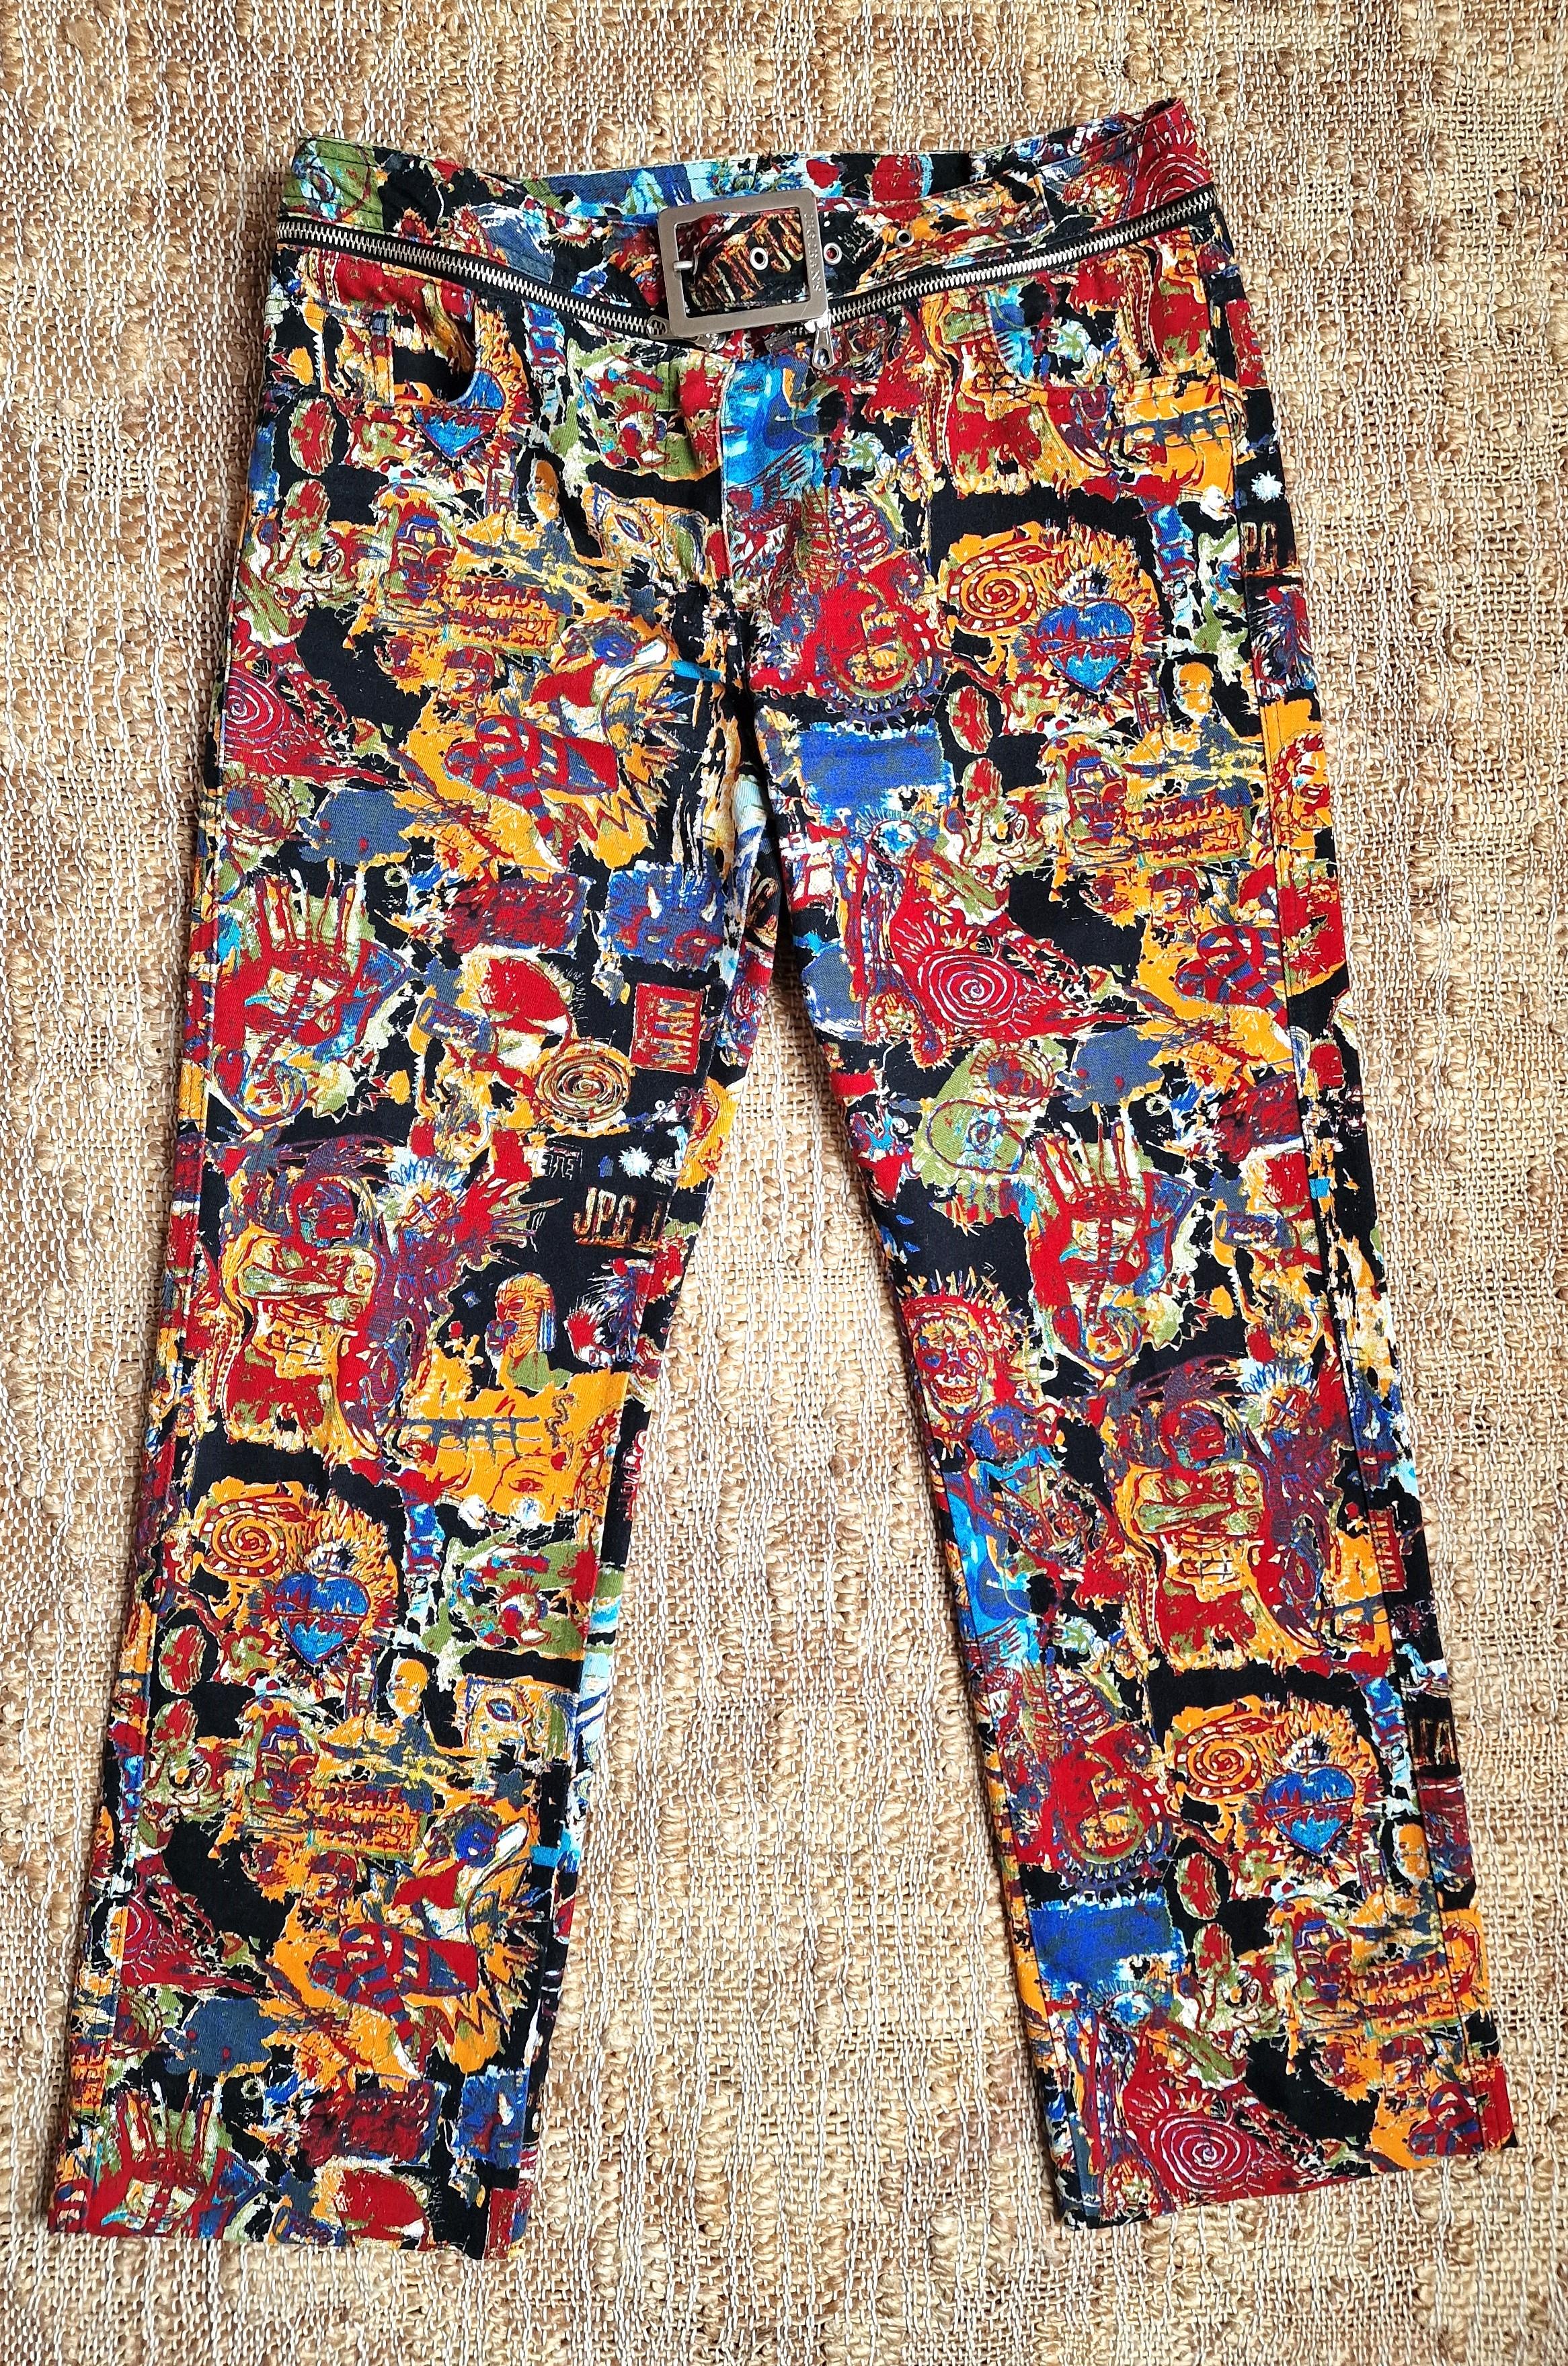 Jean-Michel Basquiat pattern pants by Jean Paul Gaultier! 

Jean-Michel Basquiat was an American artist . Basquiat's art focused on dichotomies such as wealth versus poverty, integration versus segregation, and inner versus outer experience. He